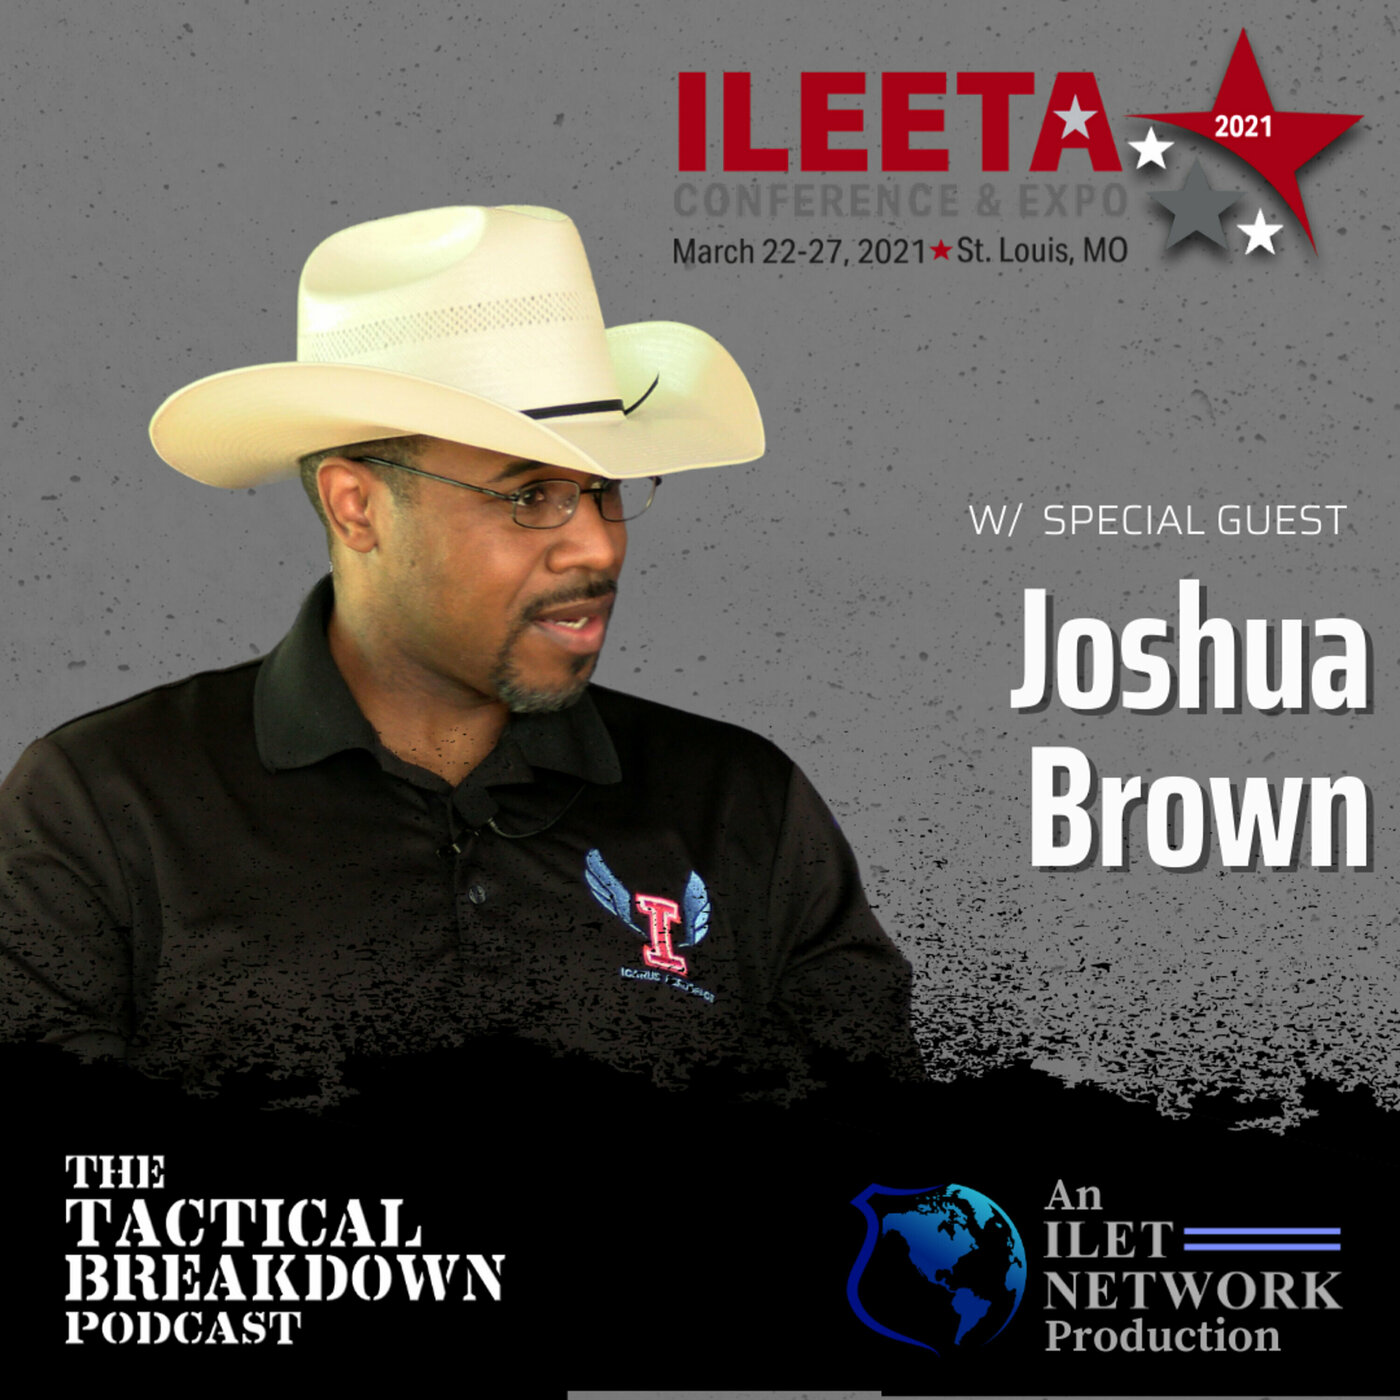 Joshua Brown - Unmanned Areal Vehicles (UAVs)